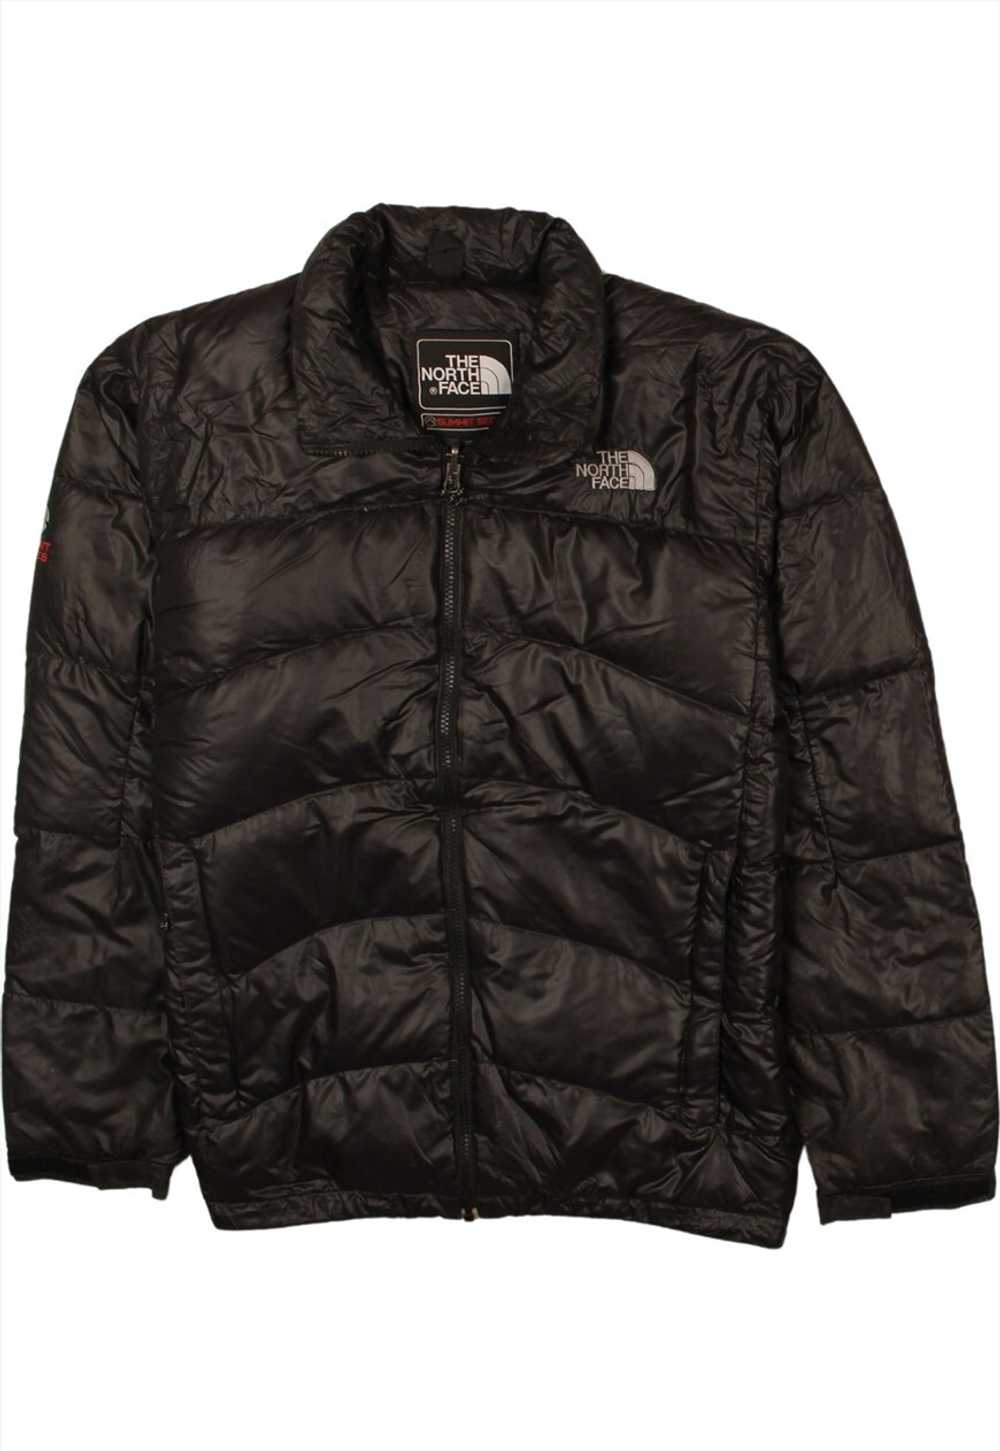 Vintage 90's The North Face Puffer Jacket Heavywe… - image 1